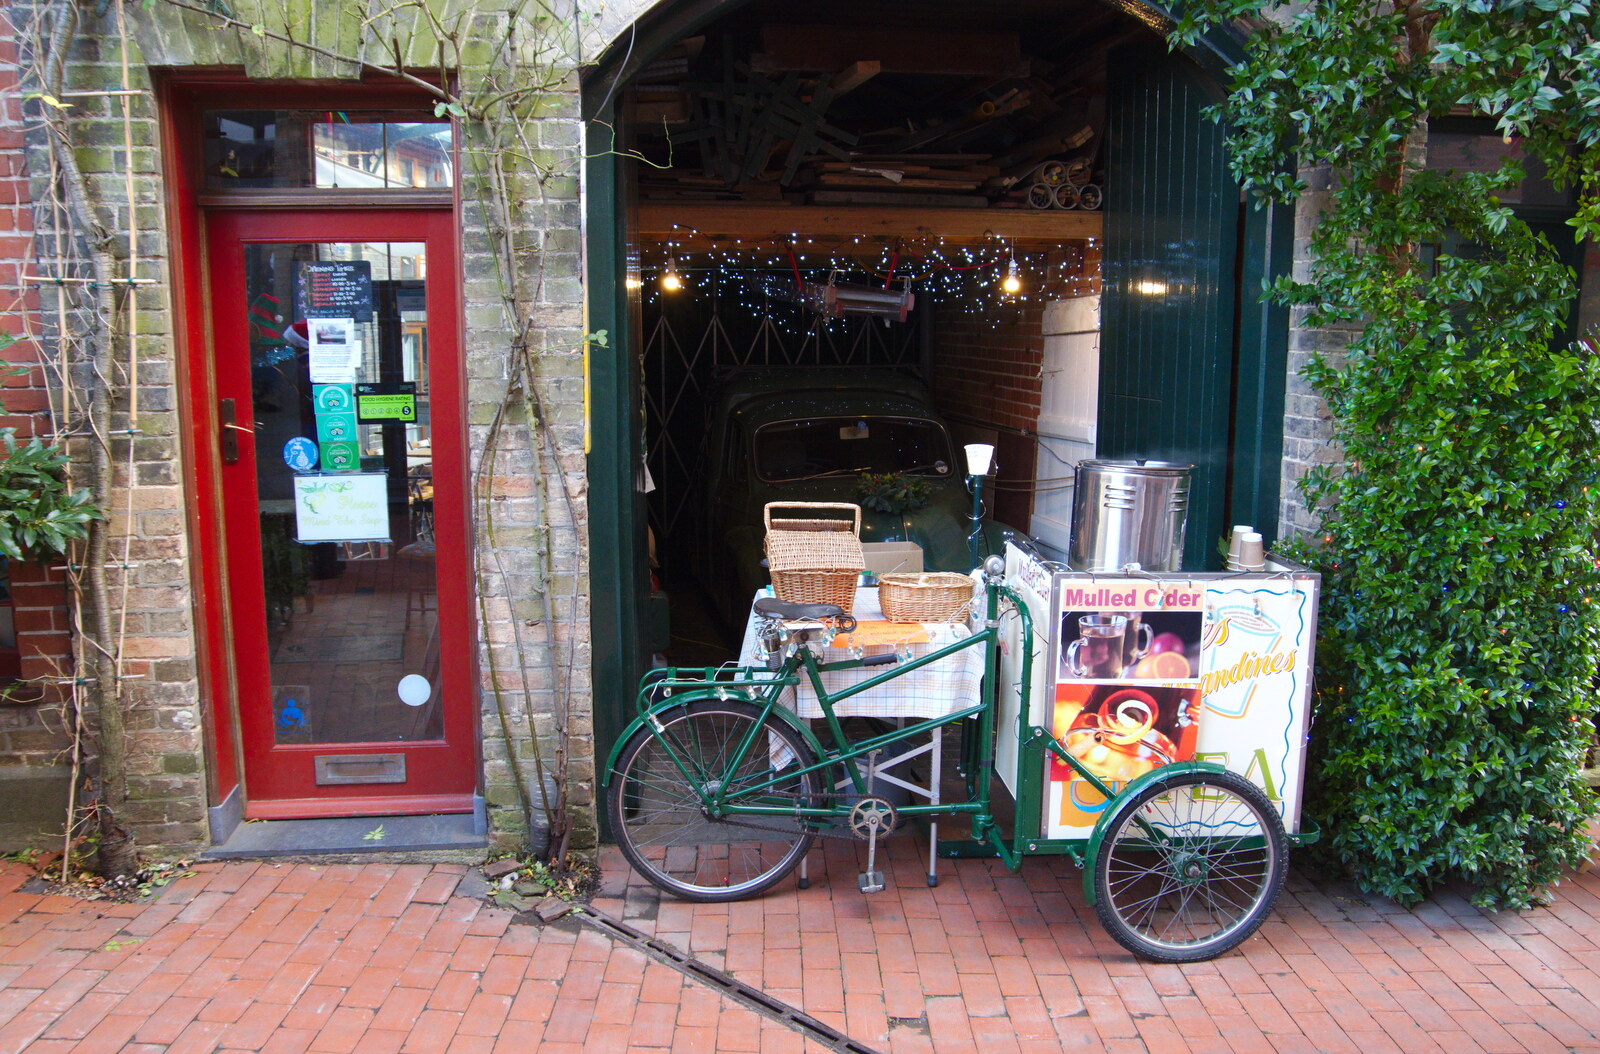 A mulled cider stall outside Amandine's from The St. Nicholas Street Winter Fayre, Diss, Norfolk - 14th December 2019